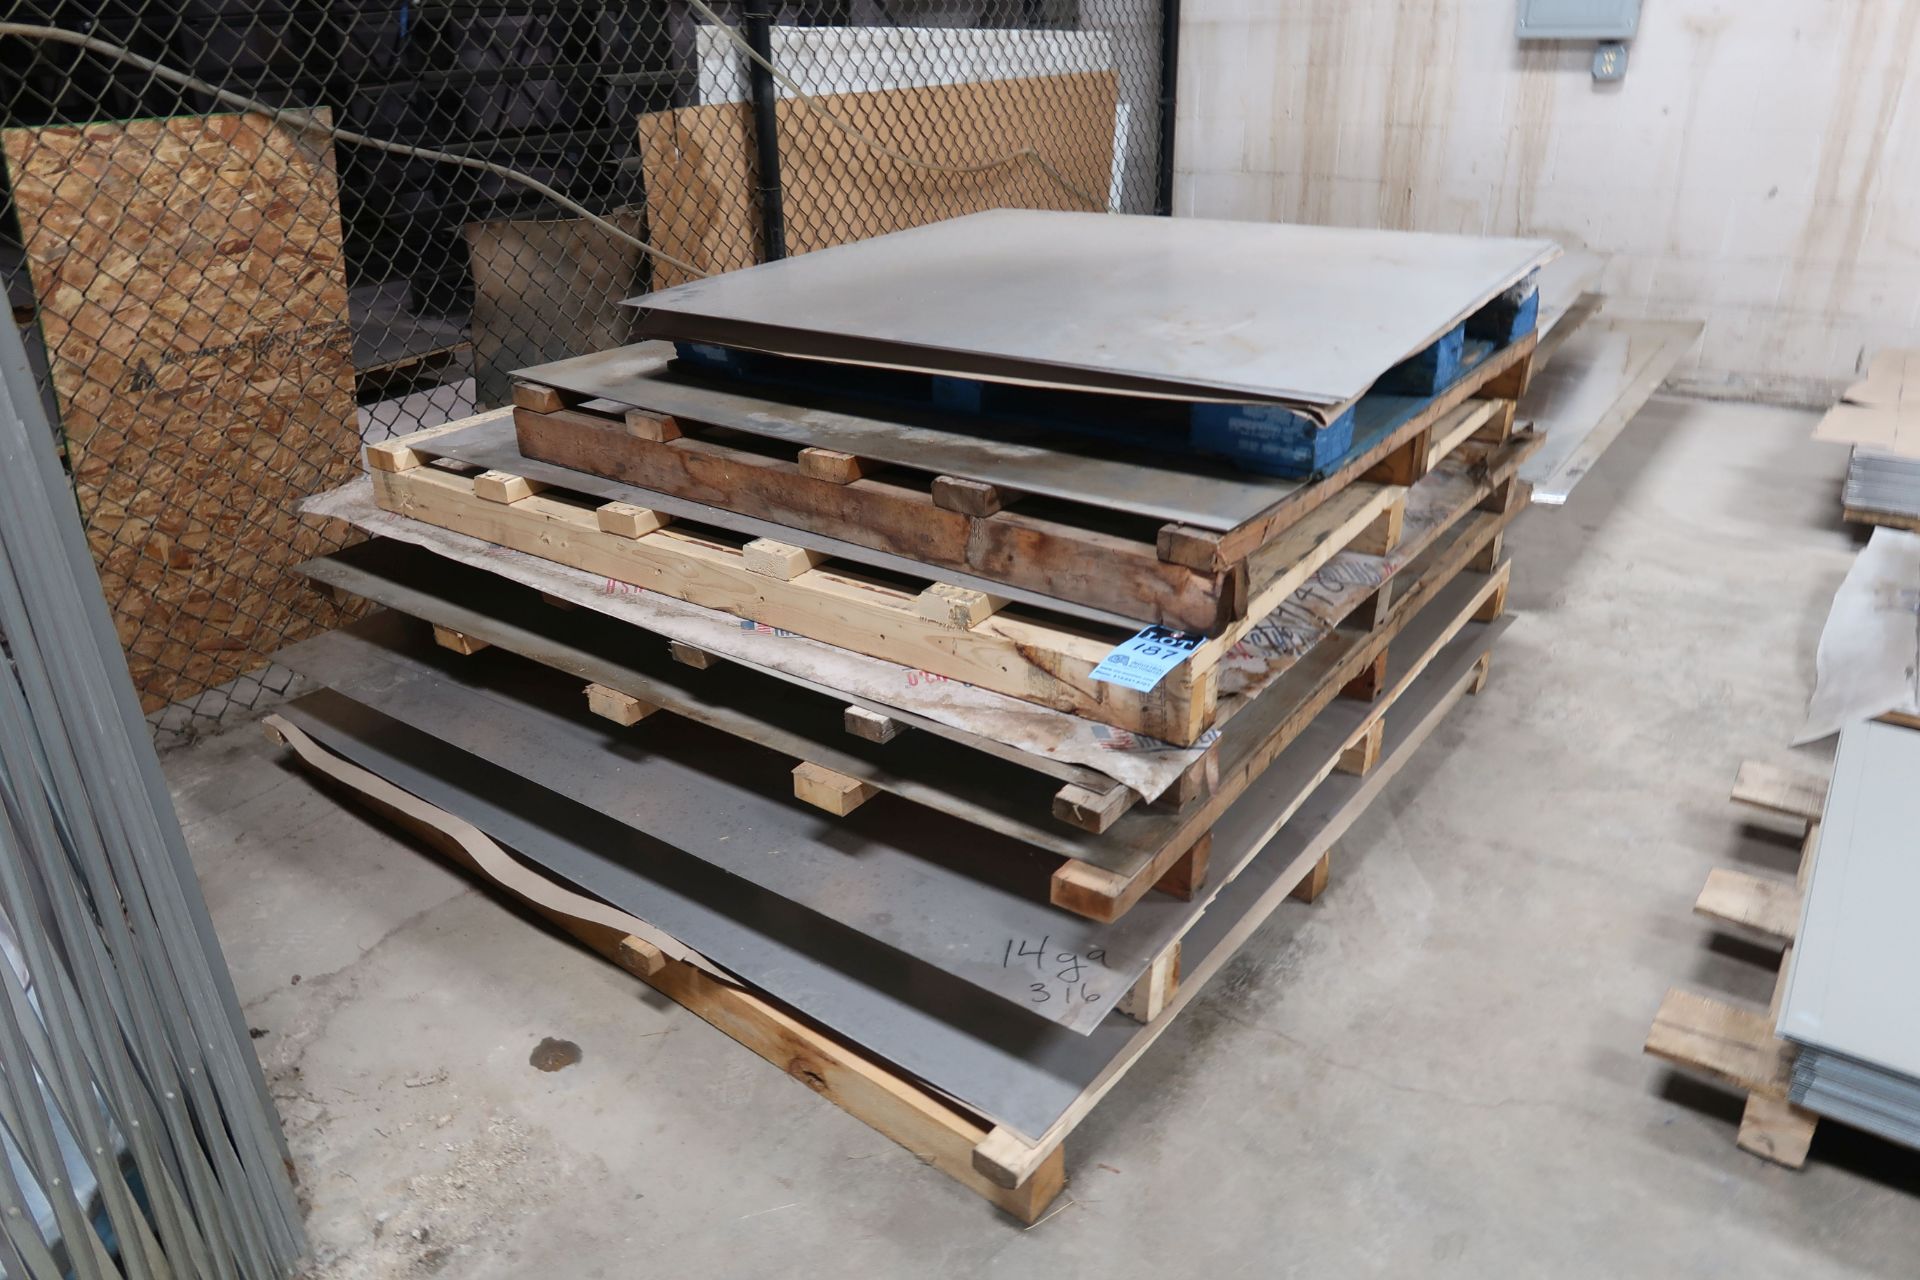 (LOT) (9) TOTAL MISCELLANEOUS SIZE STAINLESS STEEL SHEETS - (3) PIECES 438" X 48" X 14 GA - Image 9 of 9